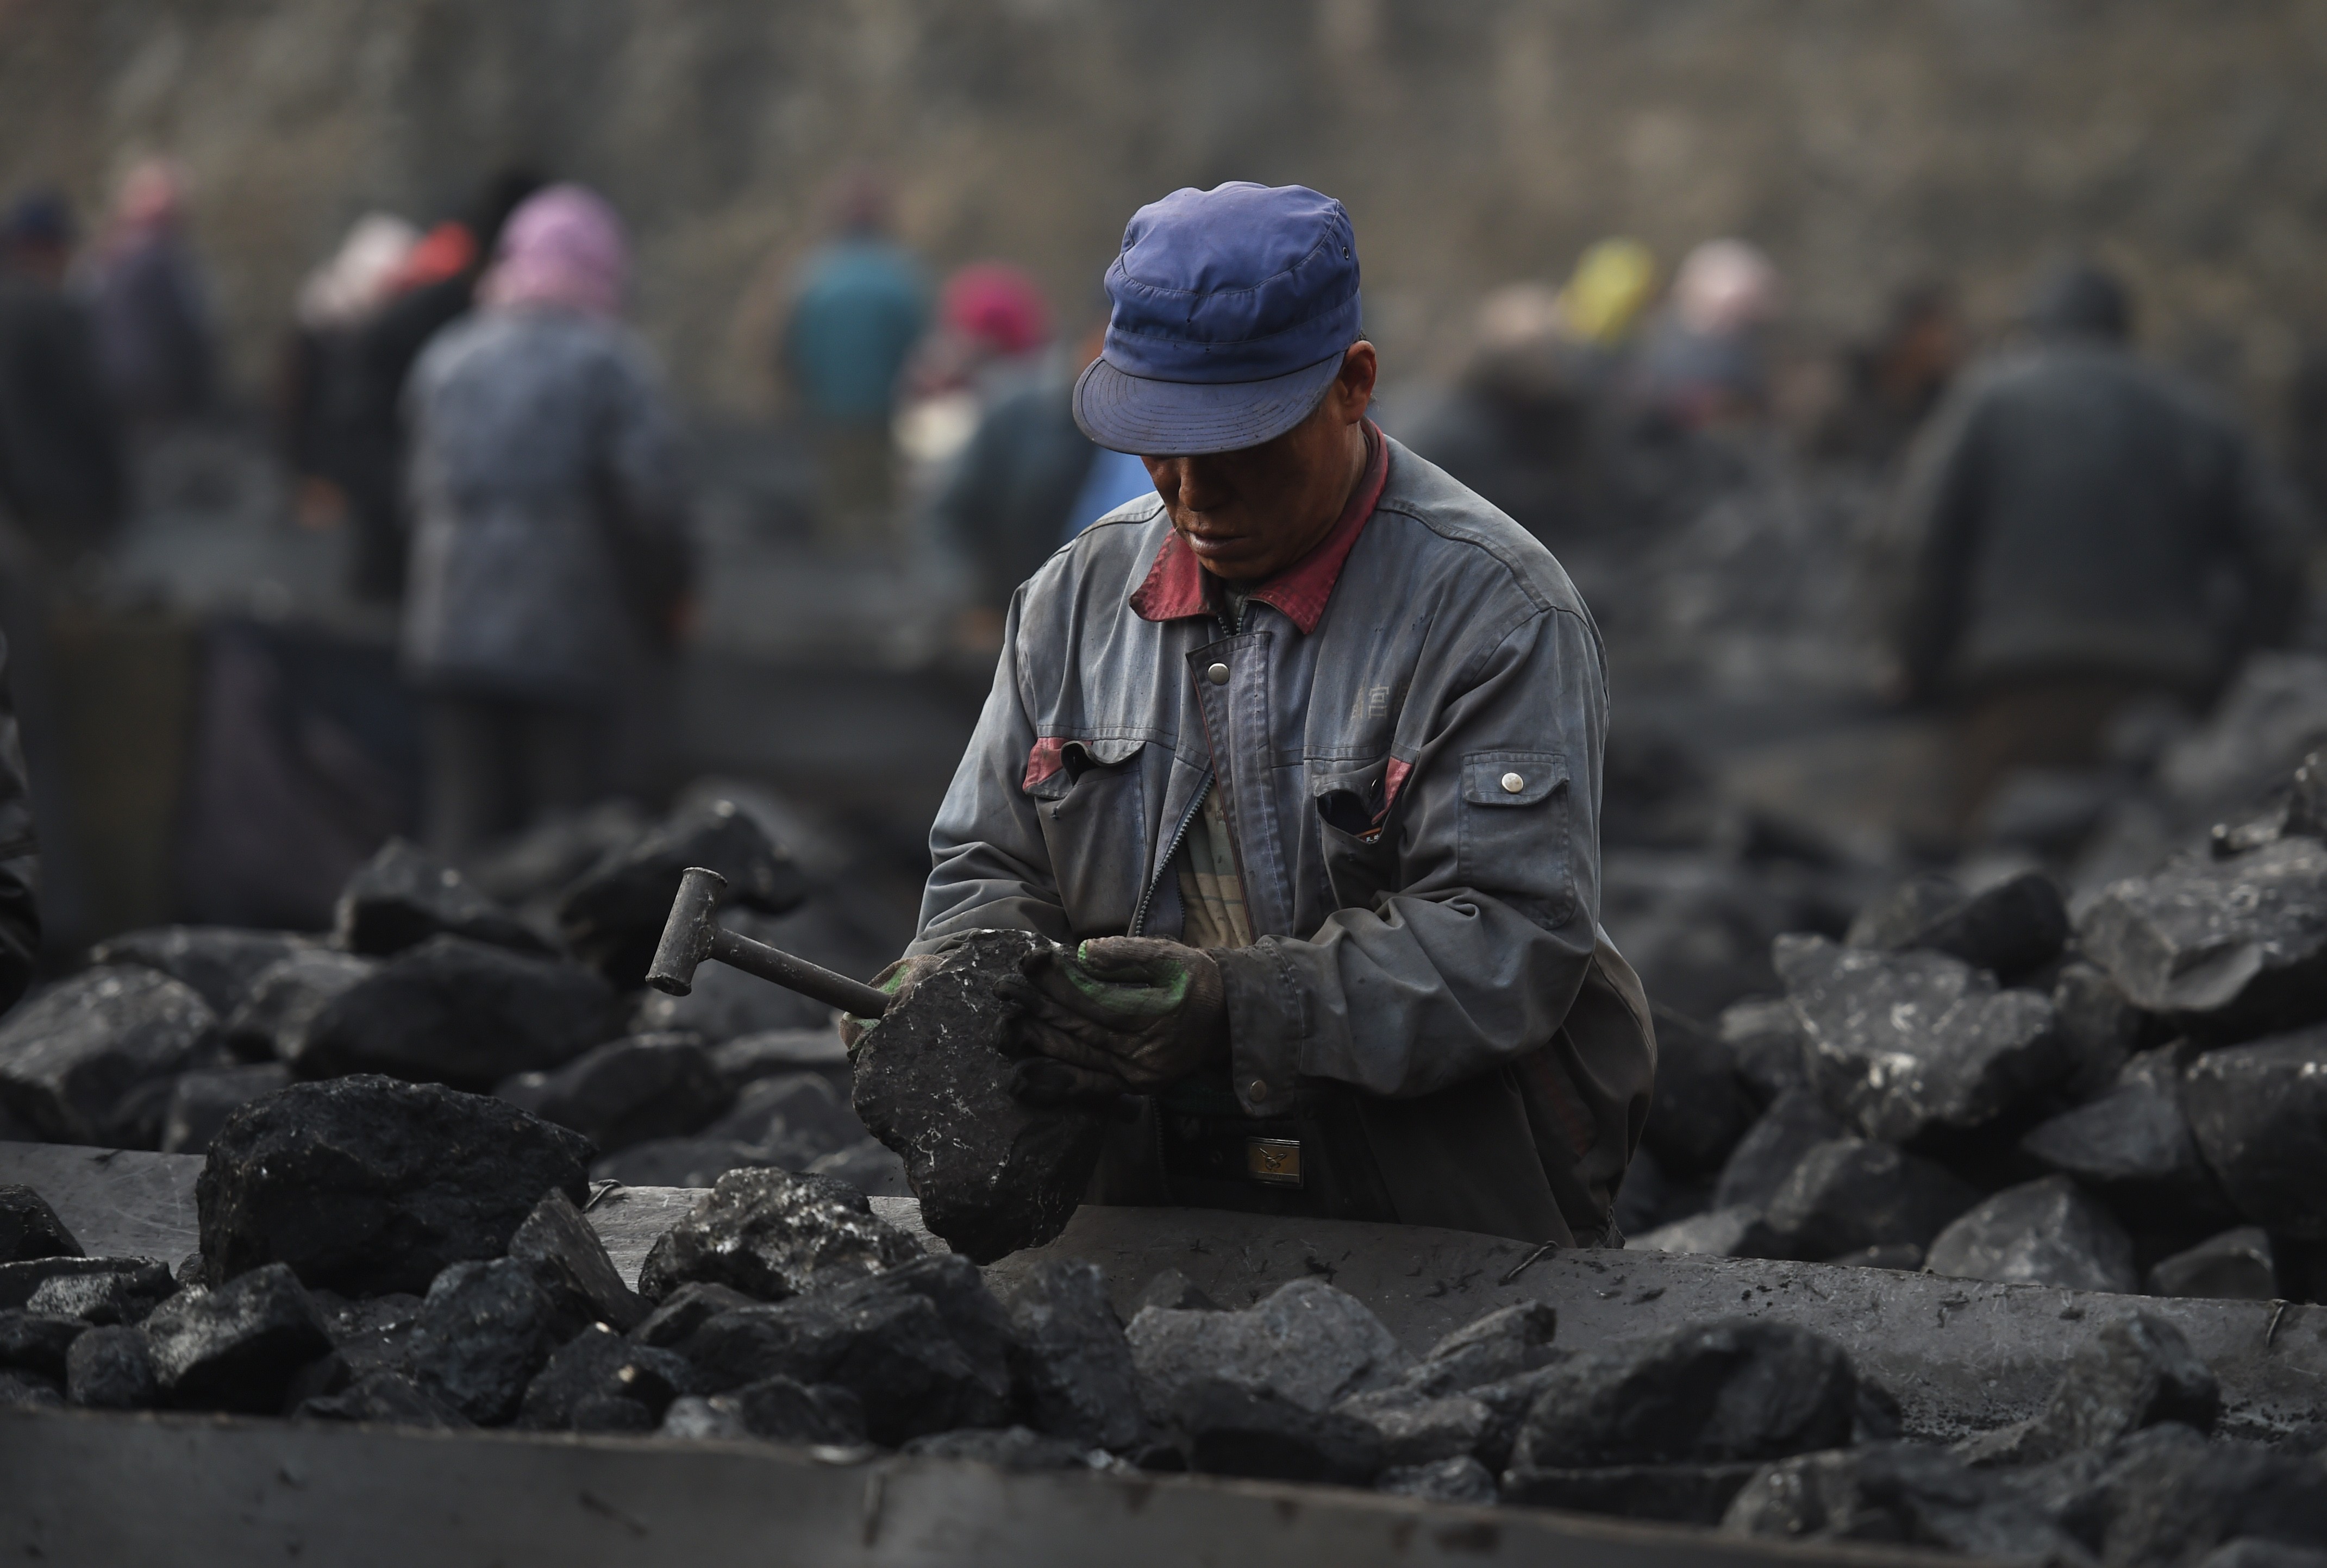 China Shenhua says higher coal prices have driven up its first-half profit, which it expects to surge by 143 per cent on the year. Photo: AFP